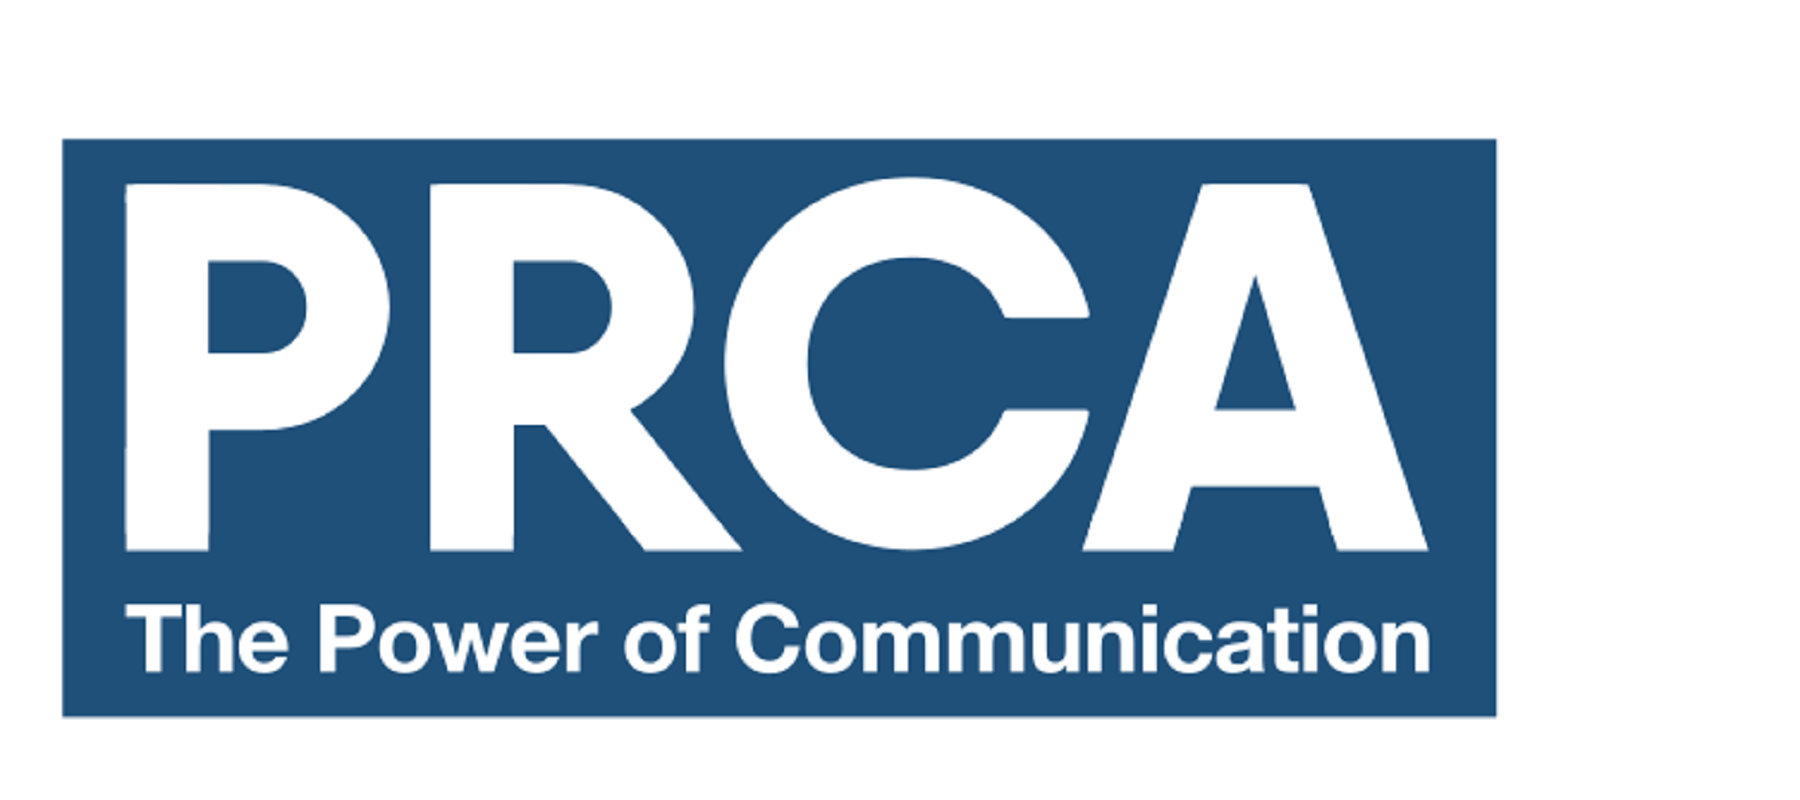 PRCA Africa appoints Ethics and Practices Board